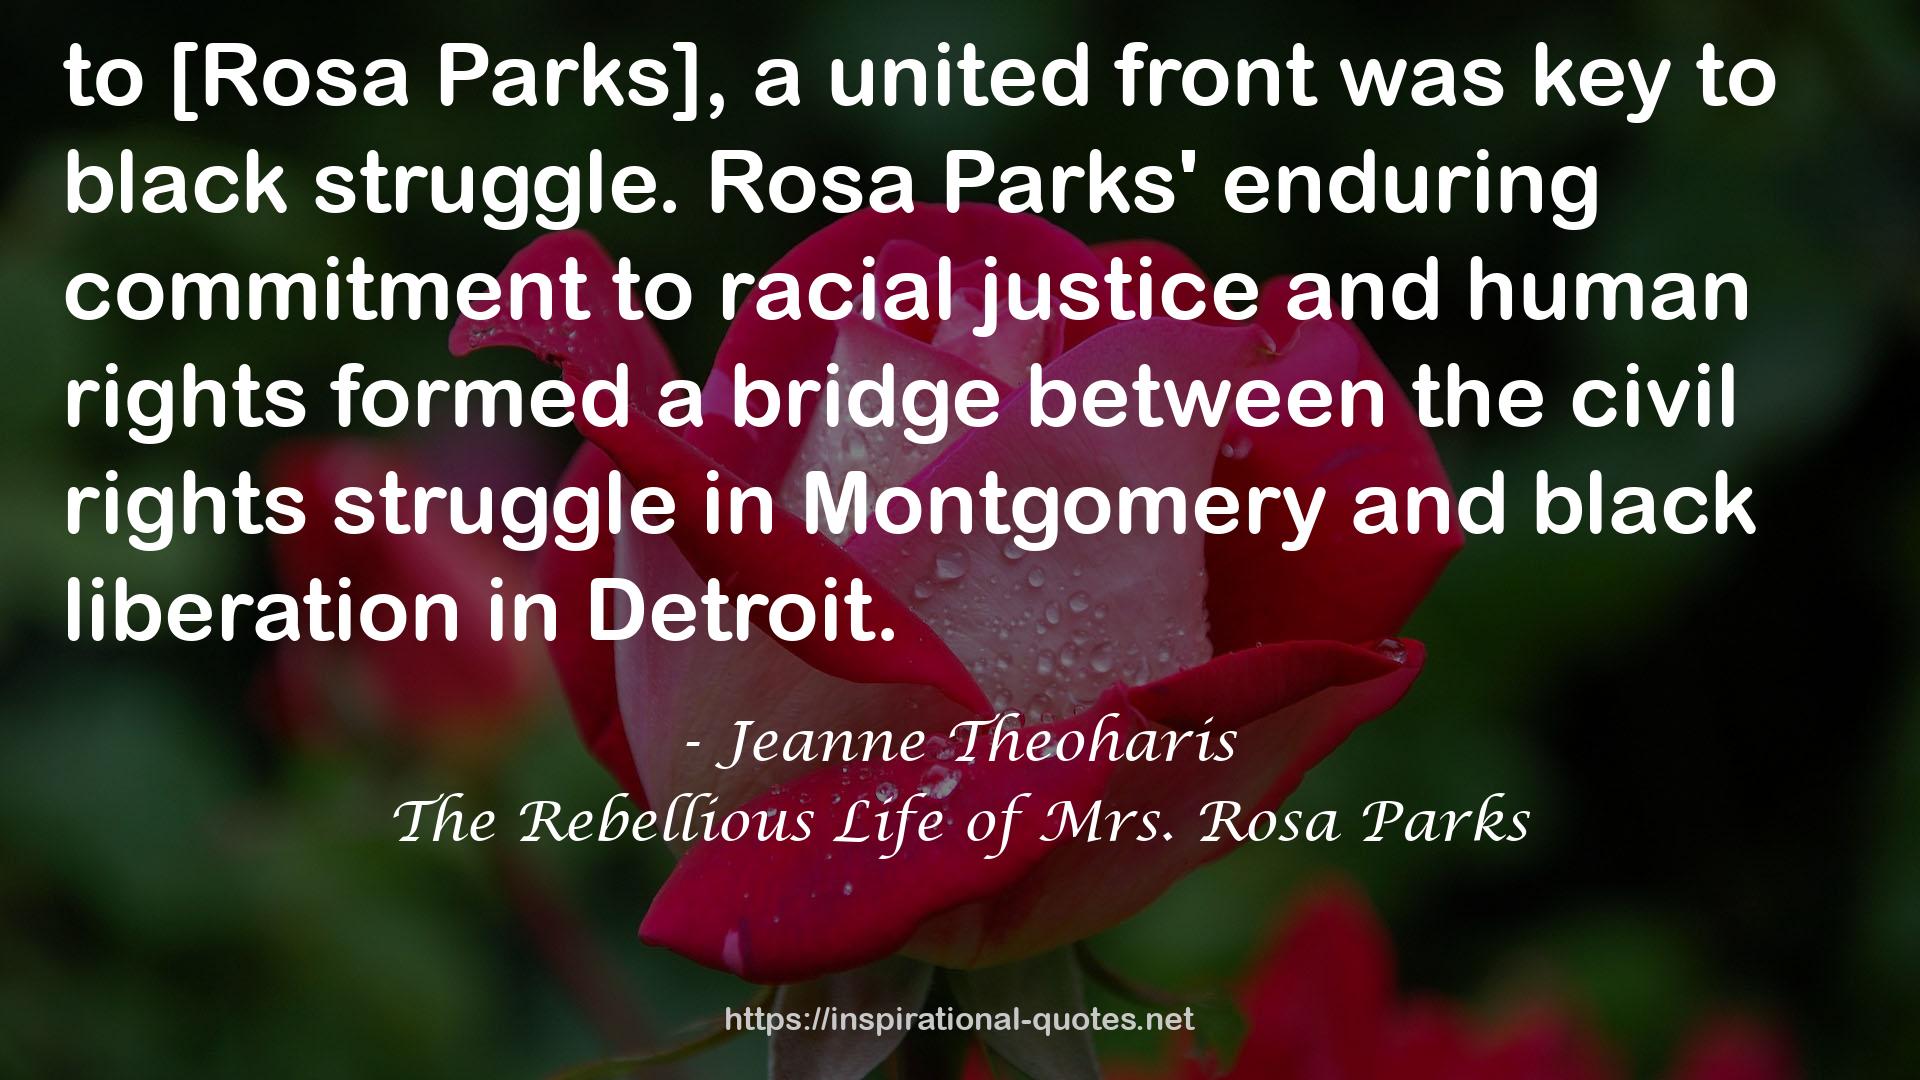 The Rebellious Life of Mrs. Rosa Parks QUOTES